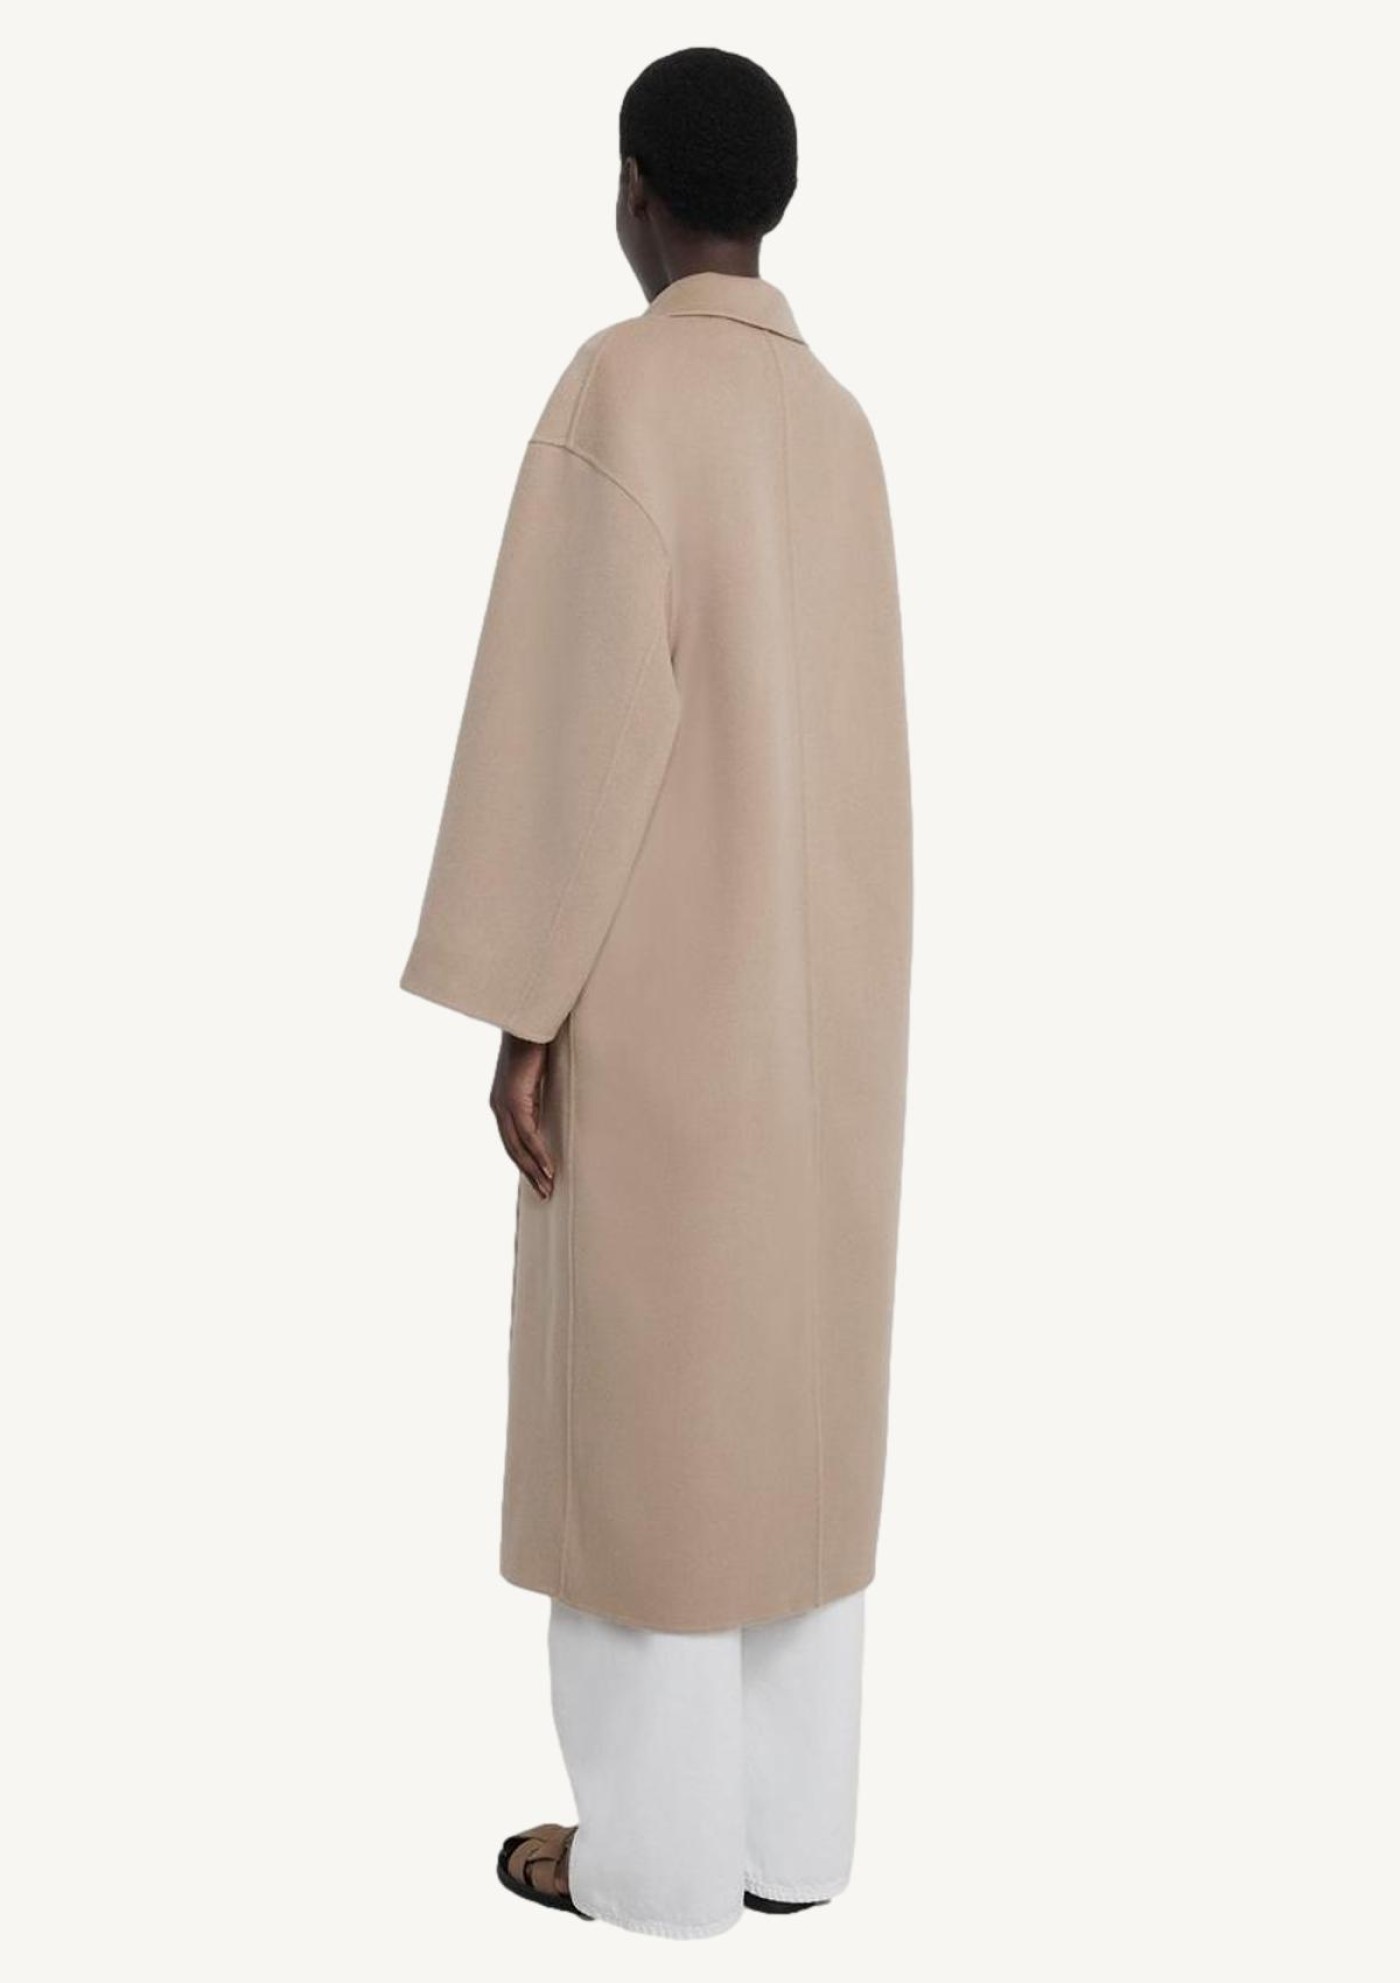 Borneo coat in beige wool and cashmere